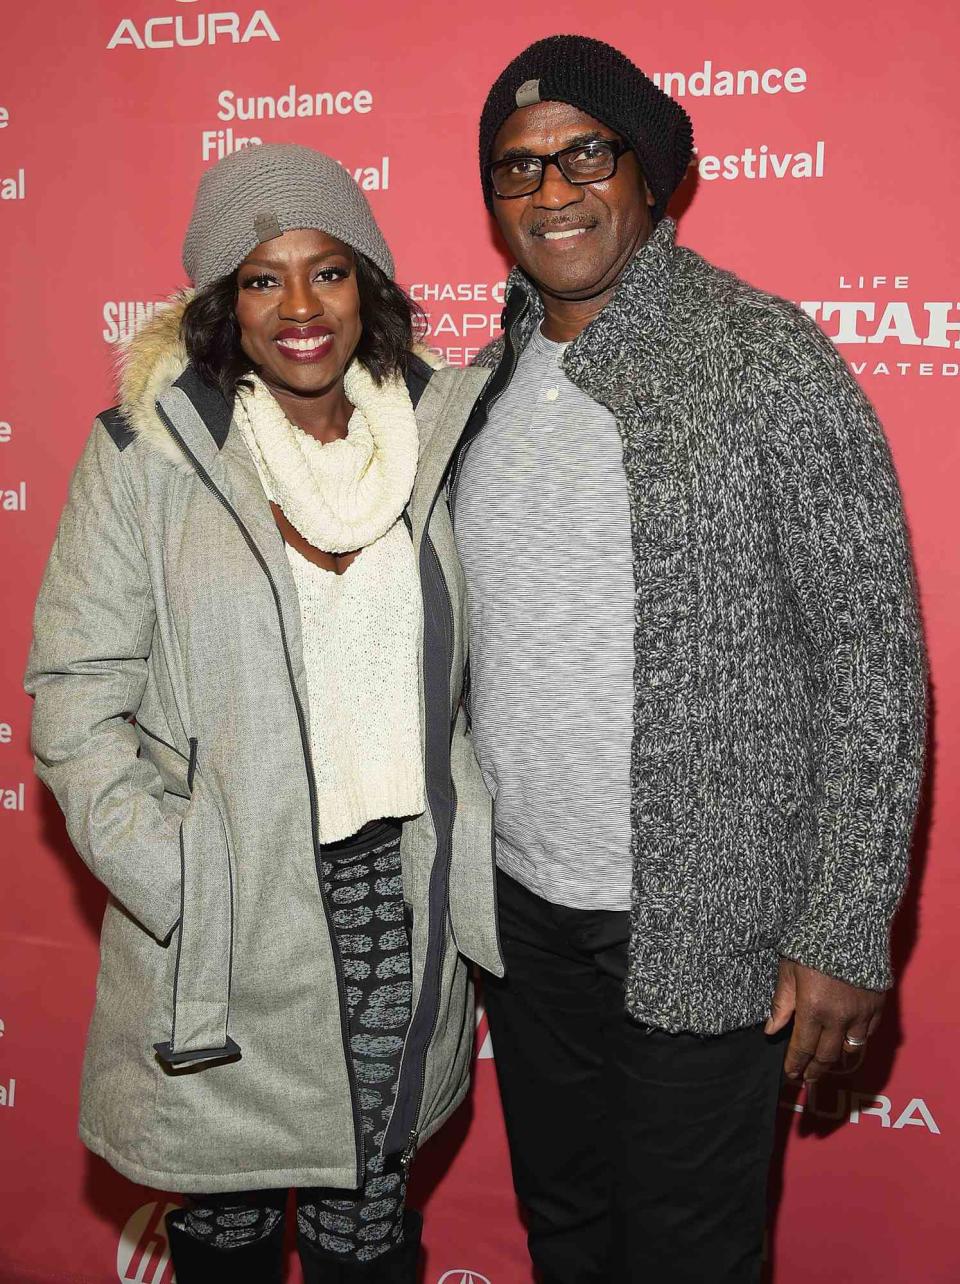 Viola Davis (L) and Julius Tennon attend the "Lila And Eve" Premiere during the 2015 Sundance Film Festival on January 30, 2015 in Park City, Utah